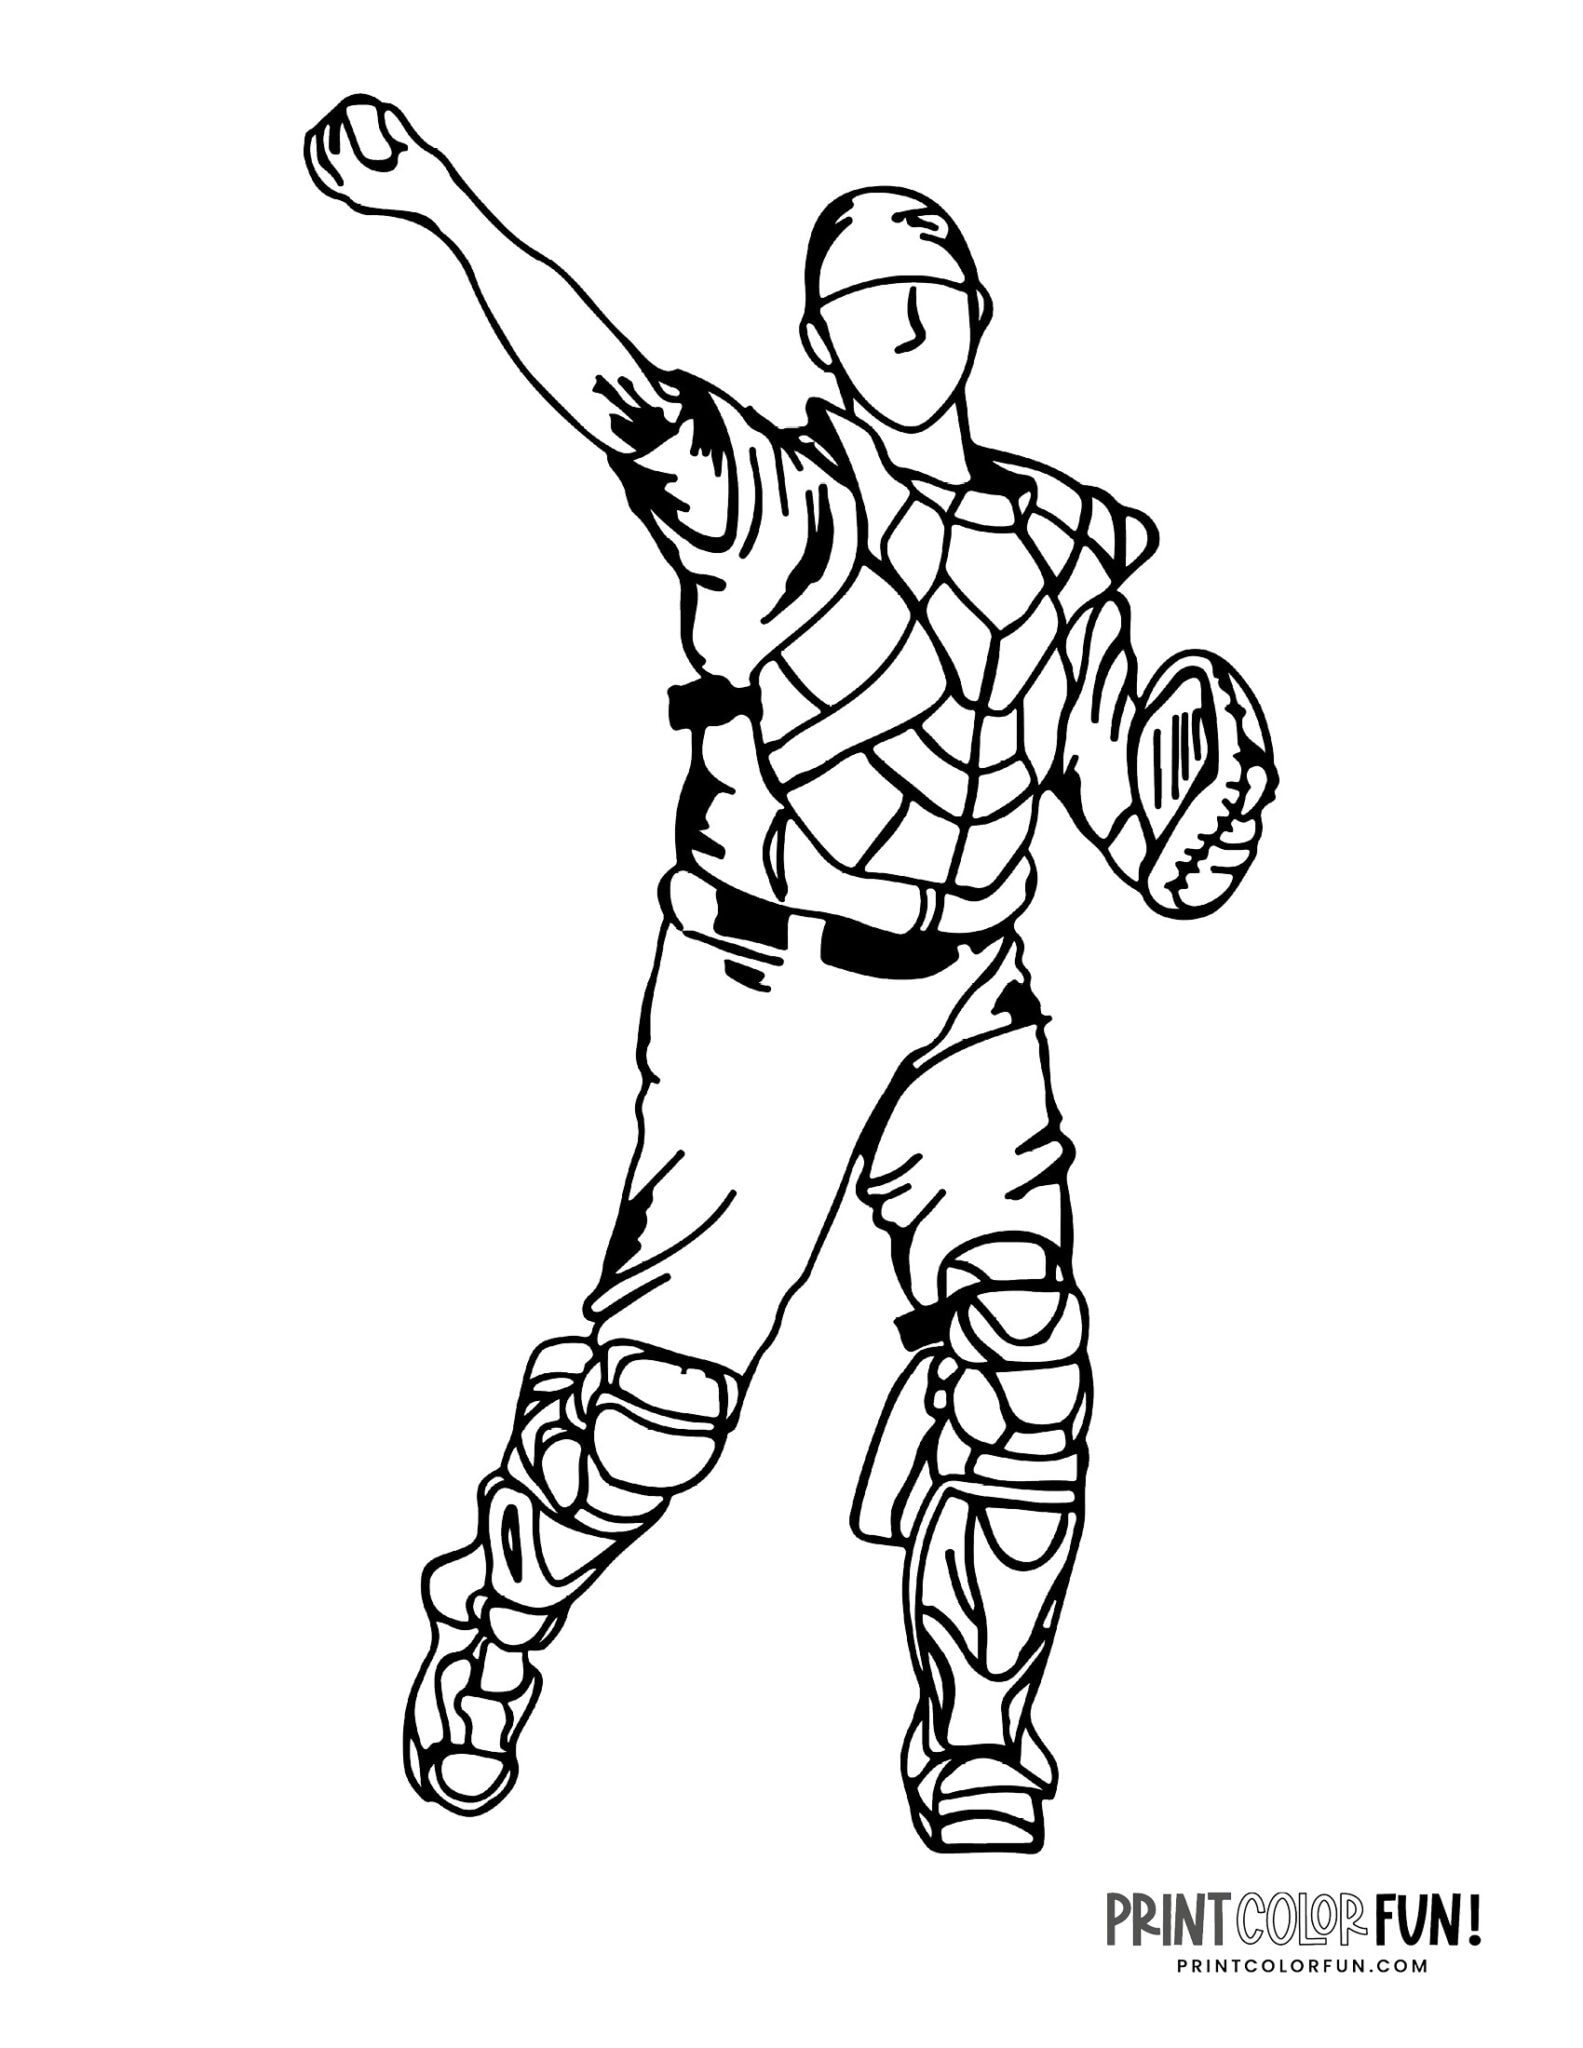 14 baseball player coloring pages: Free sports printables - Print Color